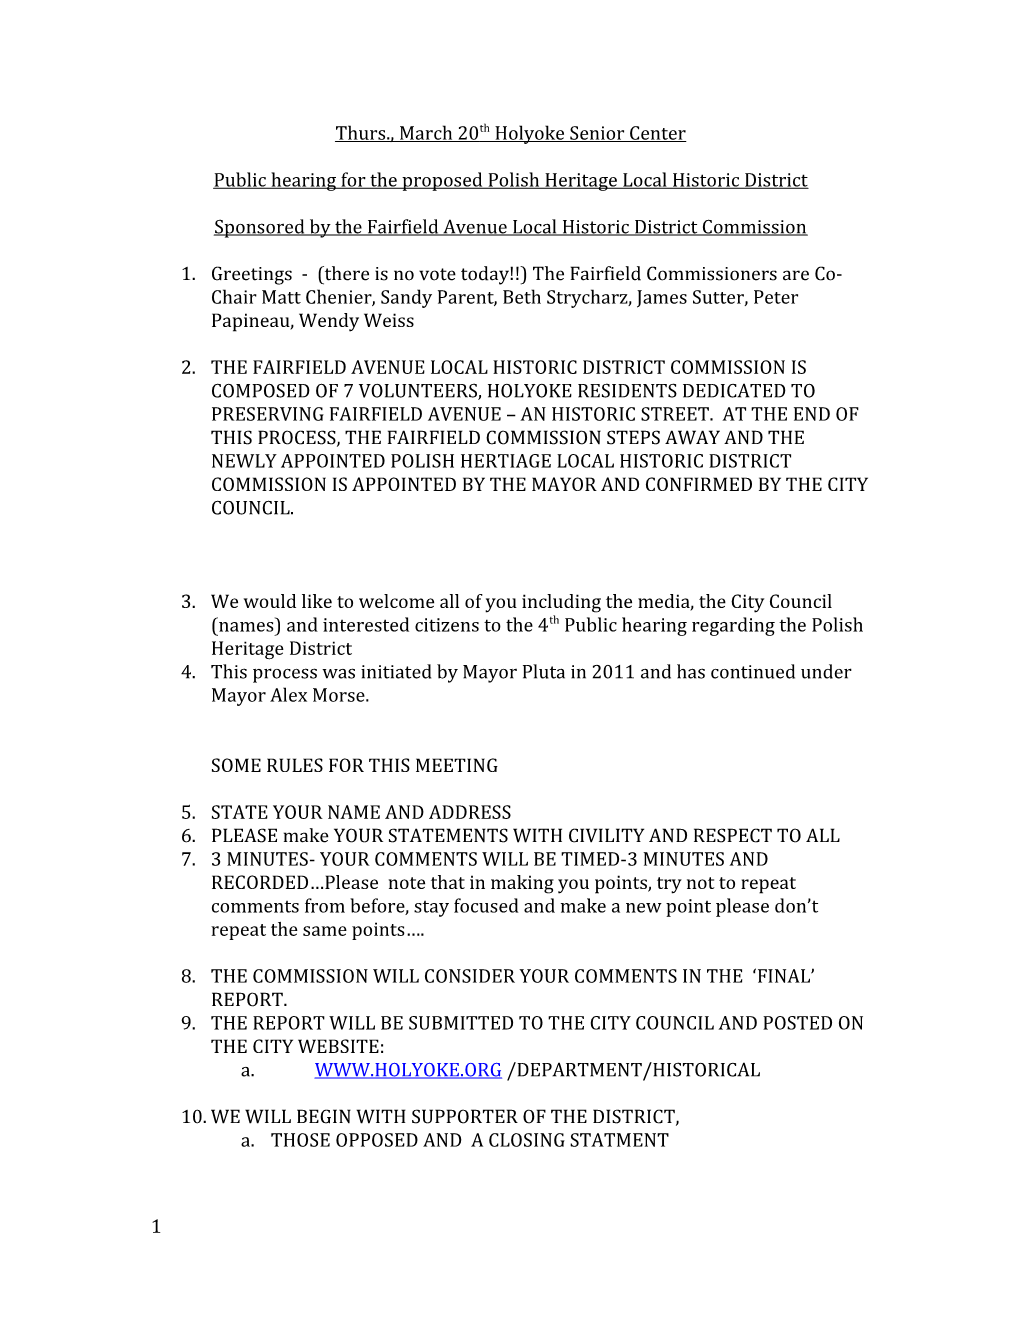 Public Hearing for the Proposed Polish Heritage Local Historic District